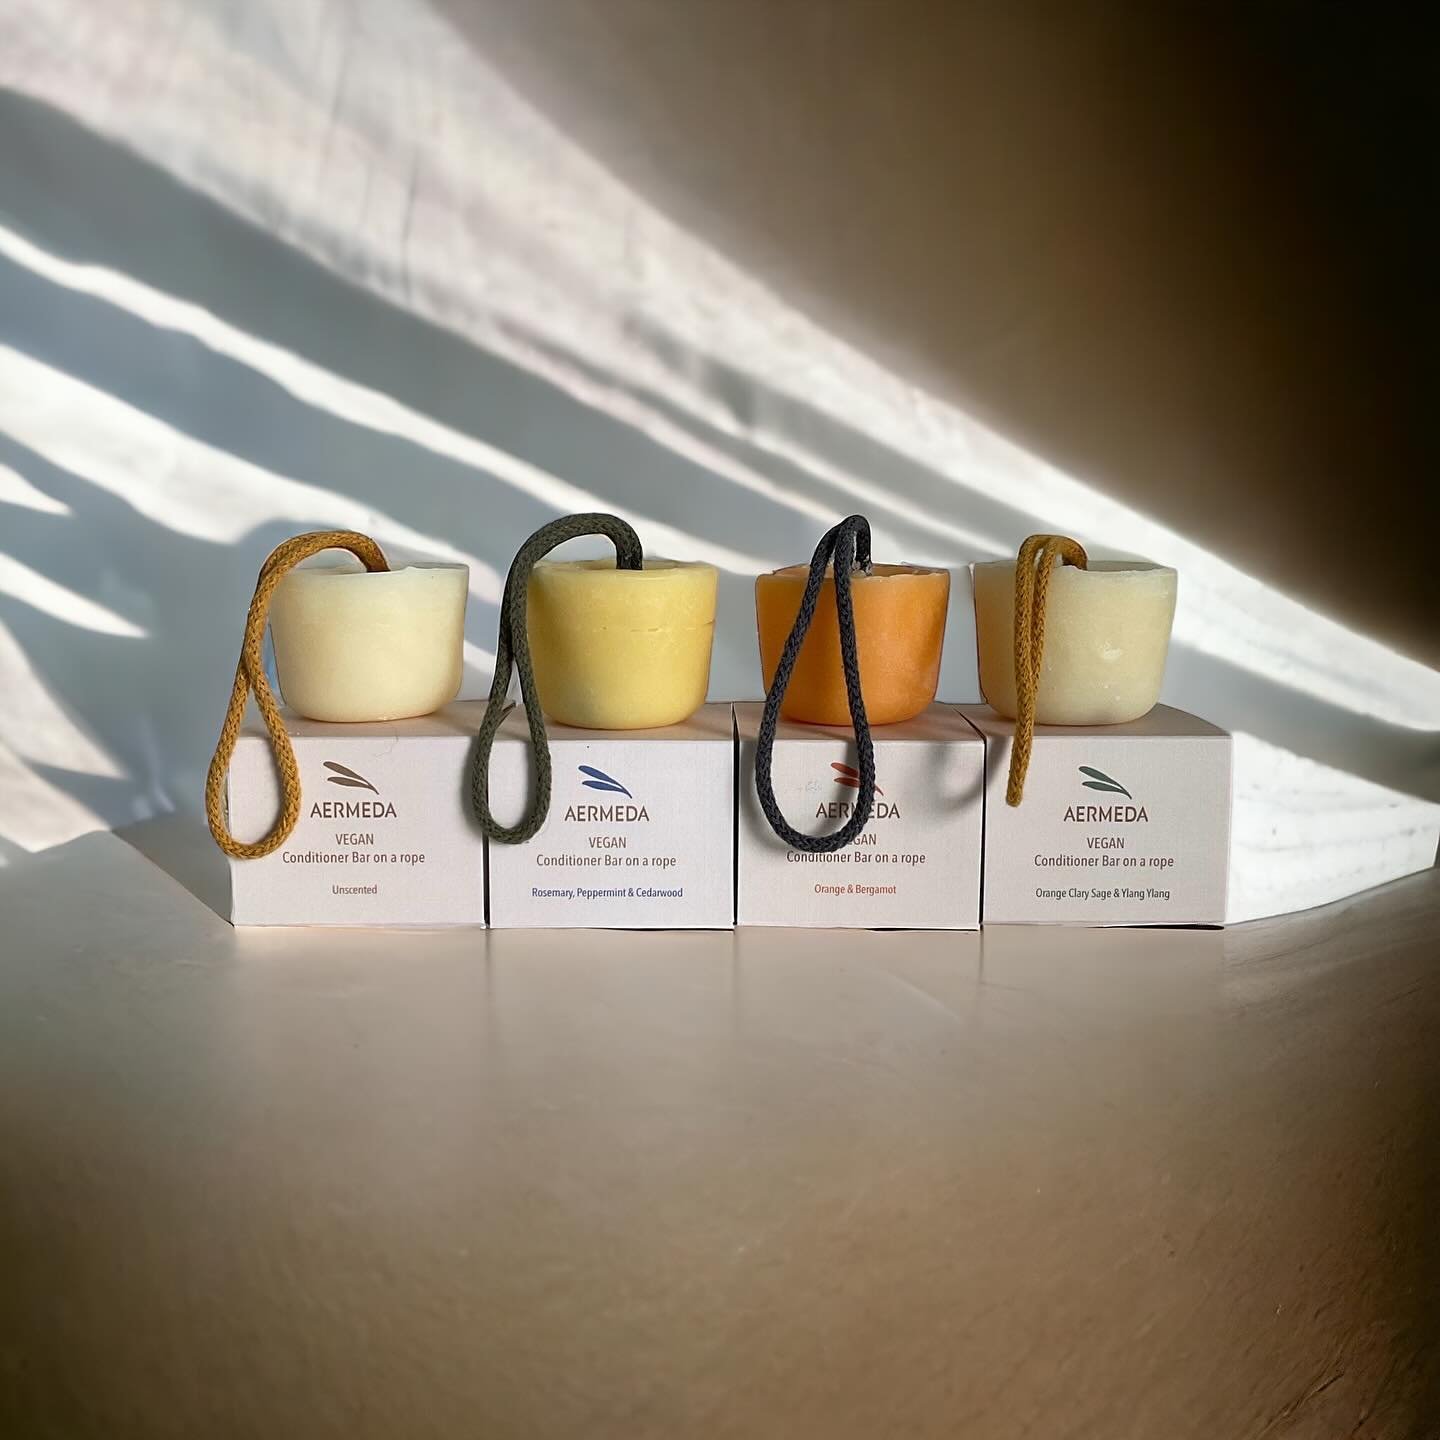 Newest members of the clan!

Shower essentials - sustainable luxury, designed for function.

Our shampoo and conditioner bars are all on ropes! The functional design of our haircare range is two fold - ropes are handy to hold and handy to hang in the